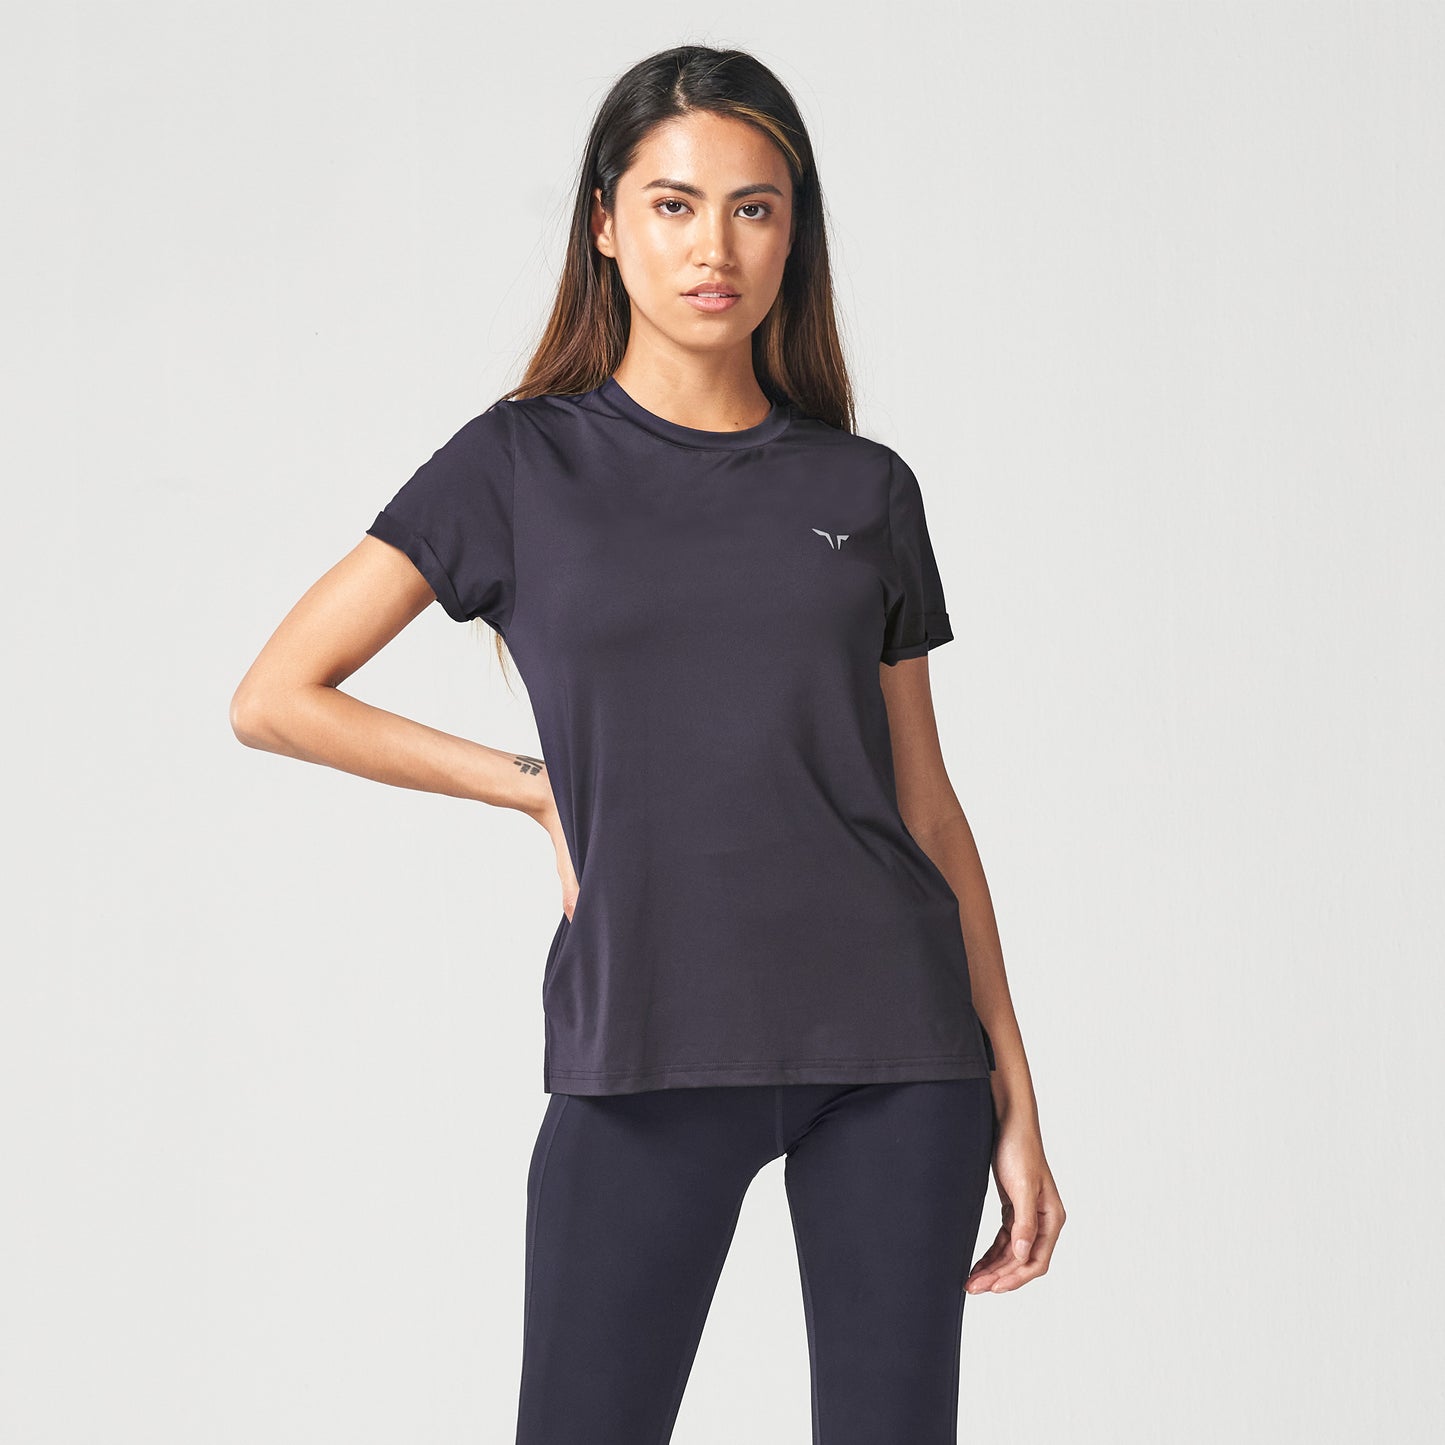 AE | Essential Relaxed Fit Tee - Black | Workout Shirts Women | SQUATWOLF